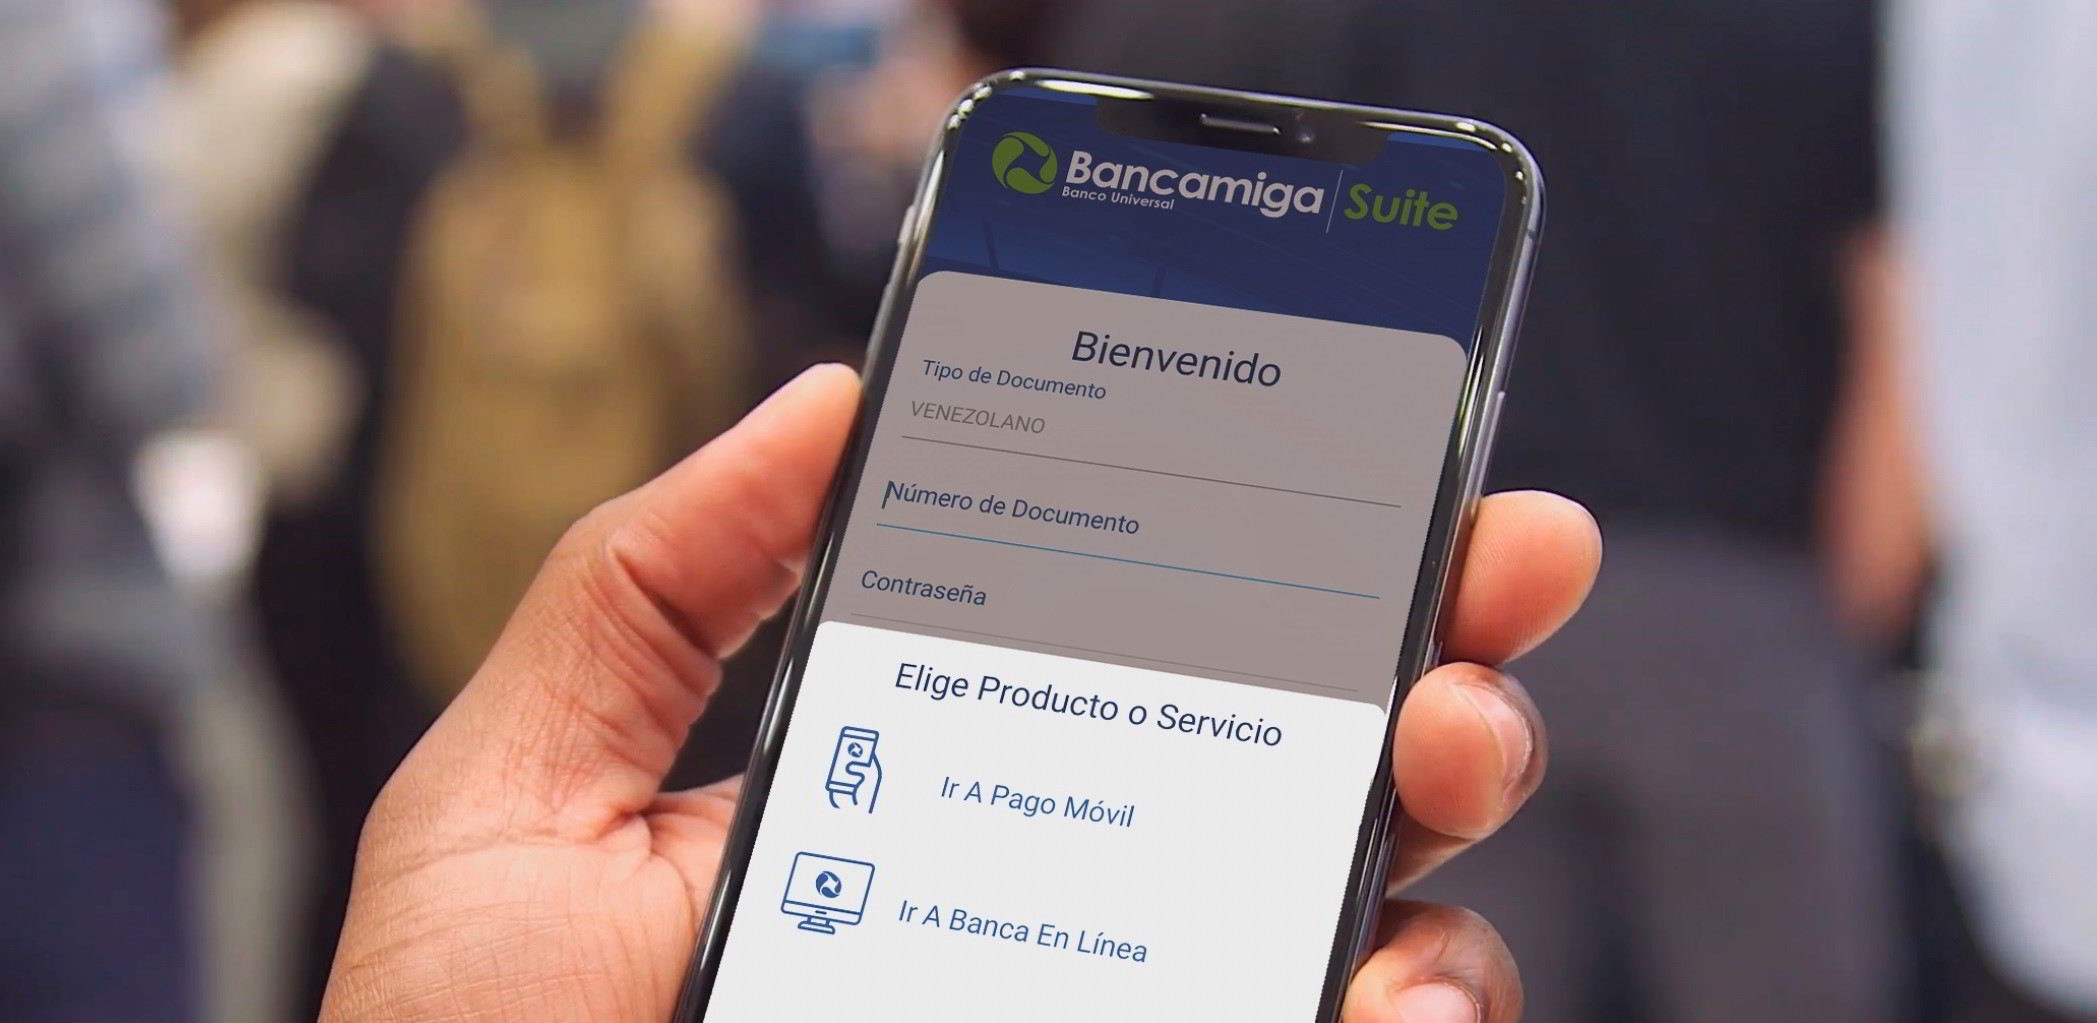 With Bancamiga you pay your Income Tax without going to bank agencies